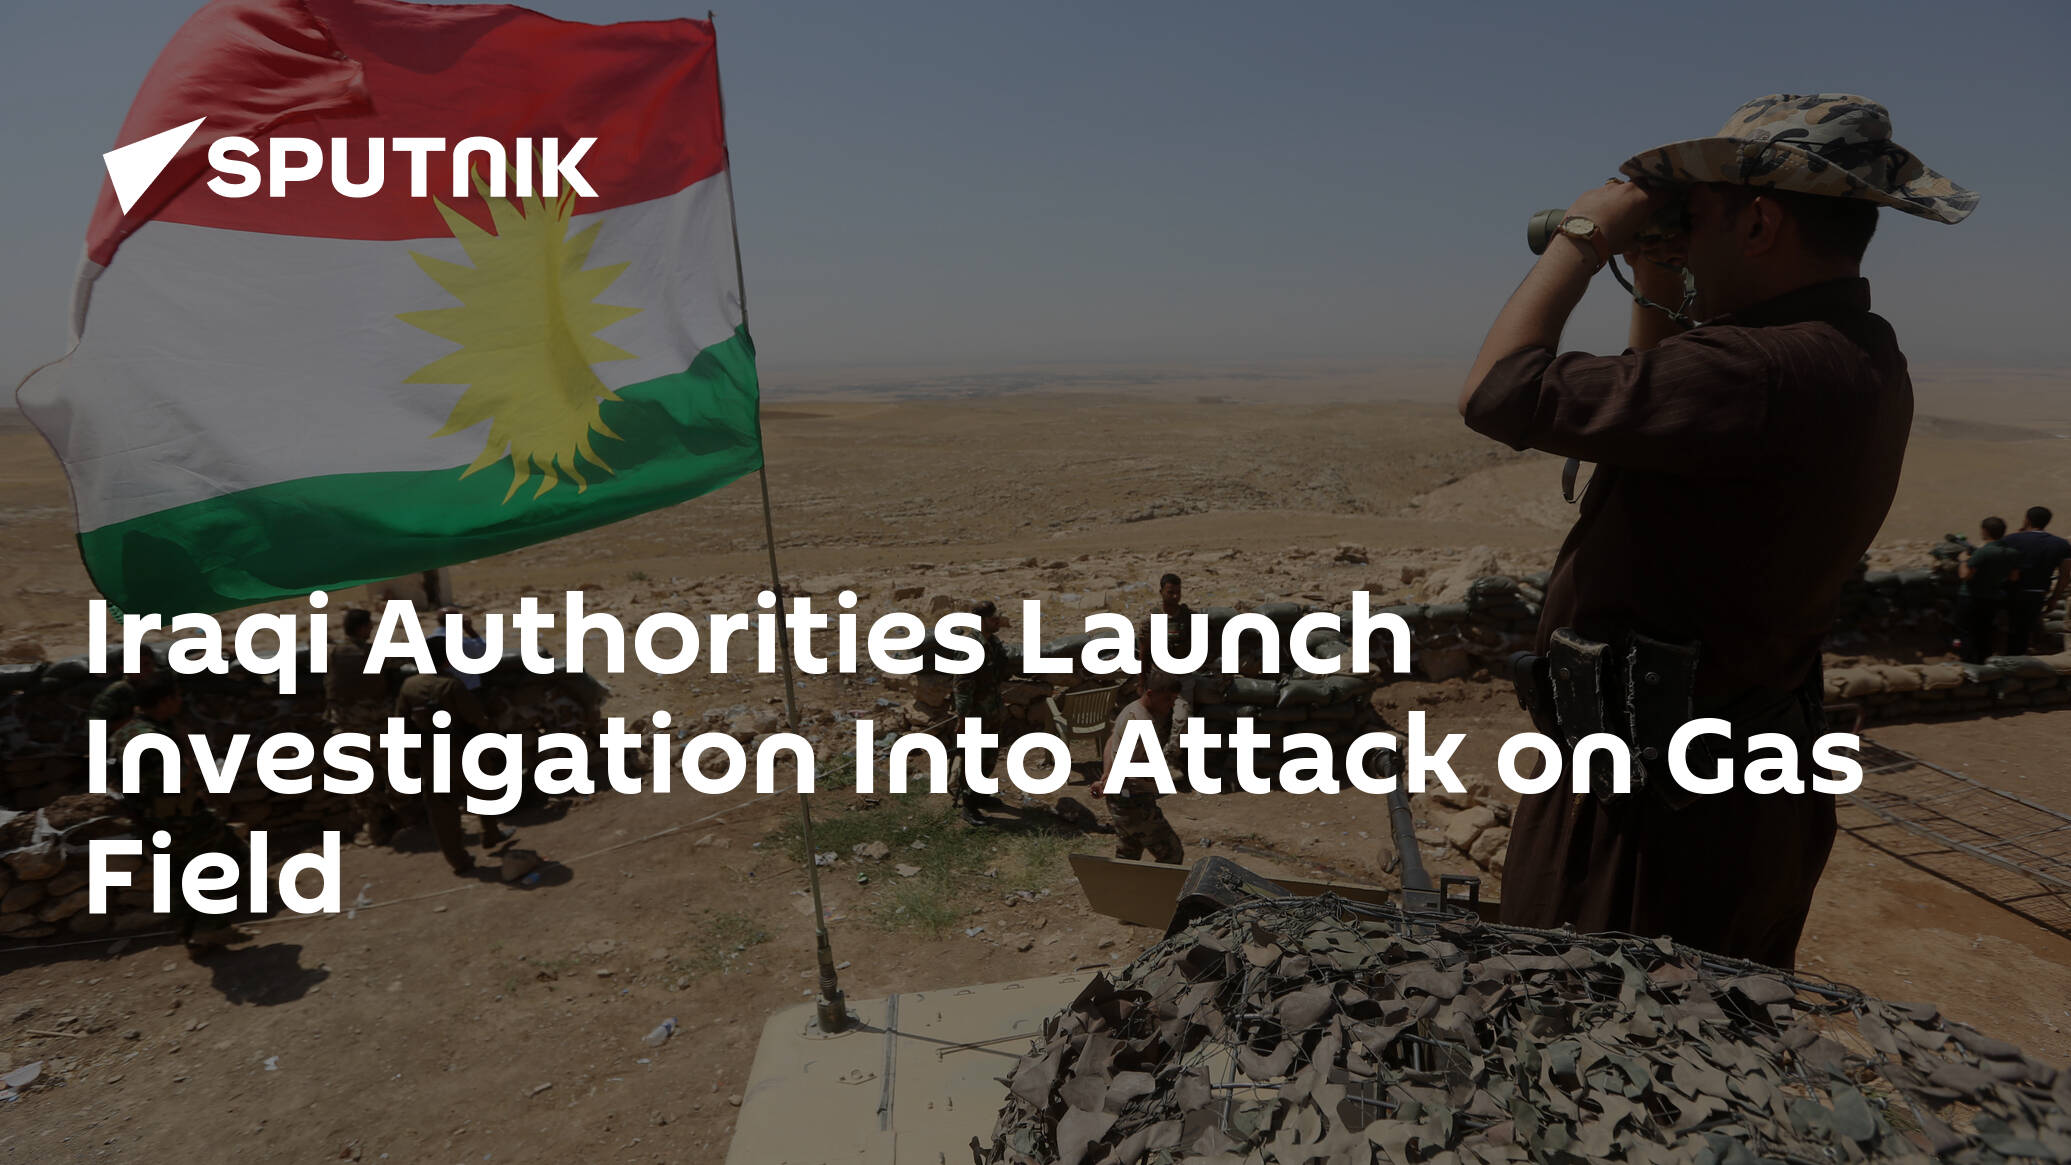 Iraqi Authorities Launch Investigation Into Attack on Gas Field